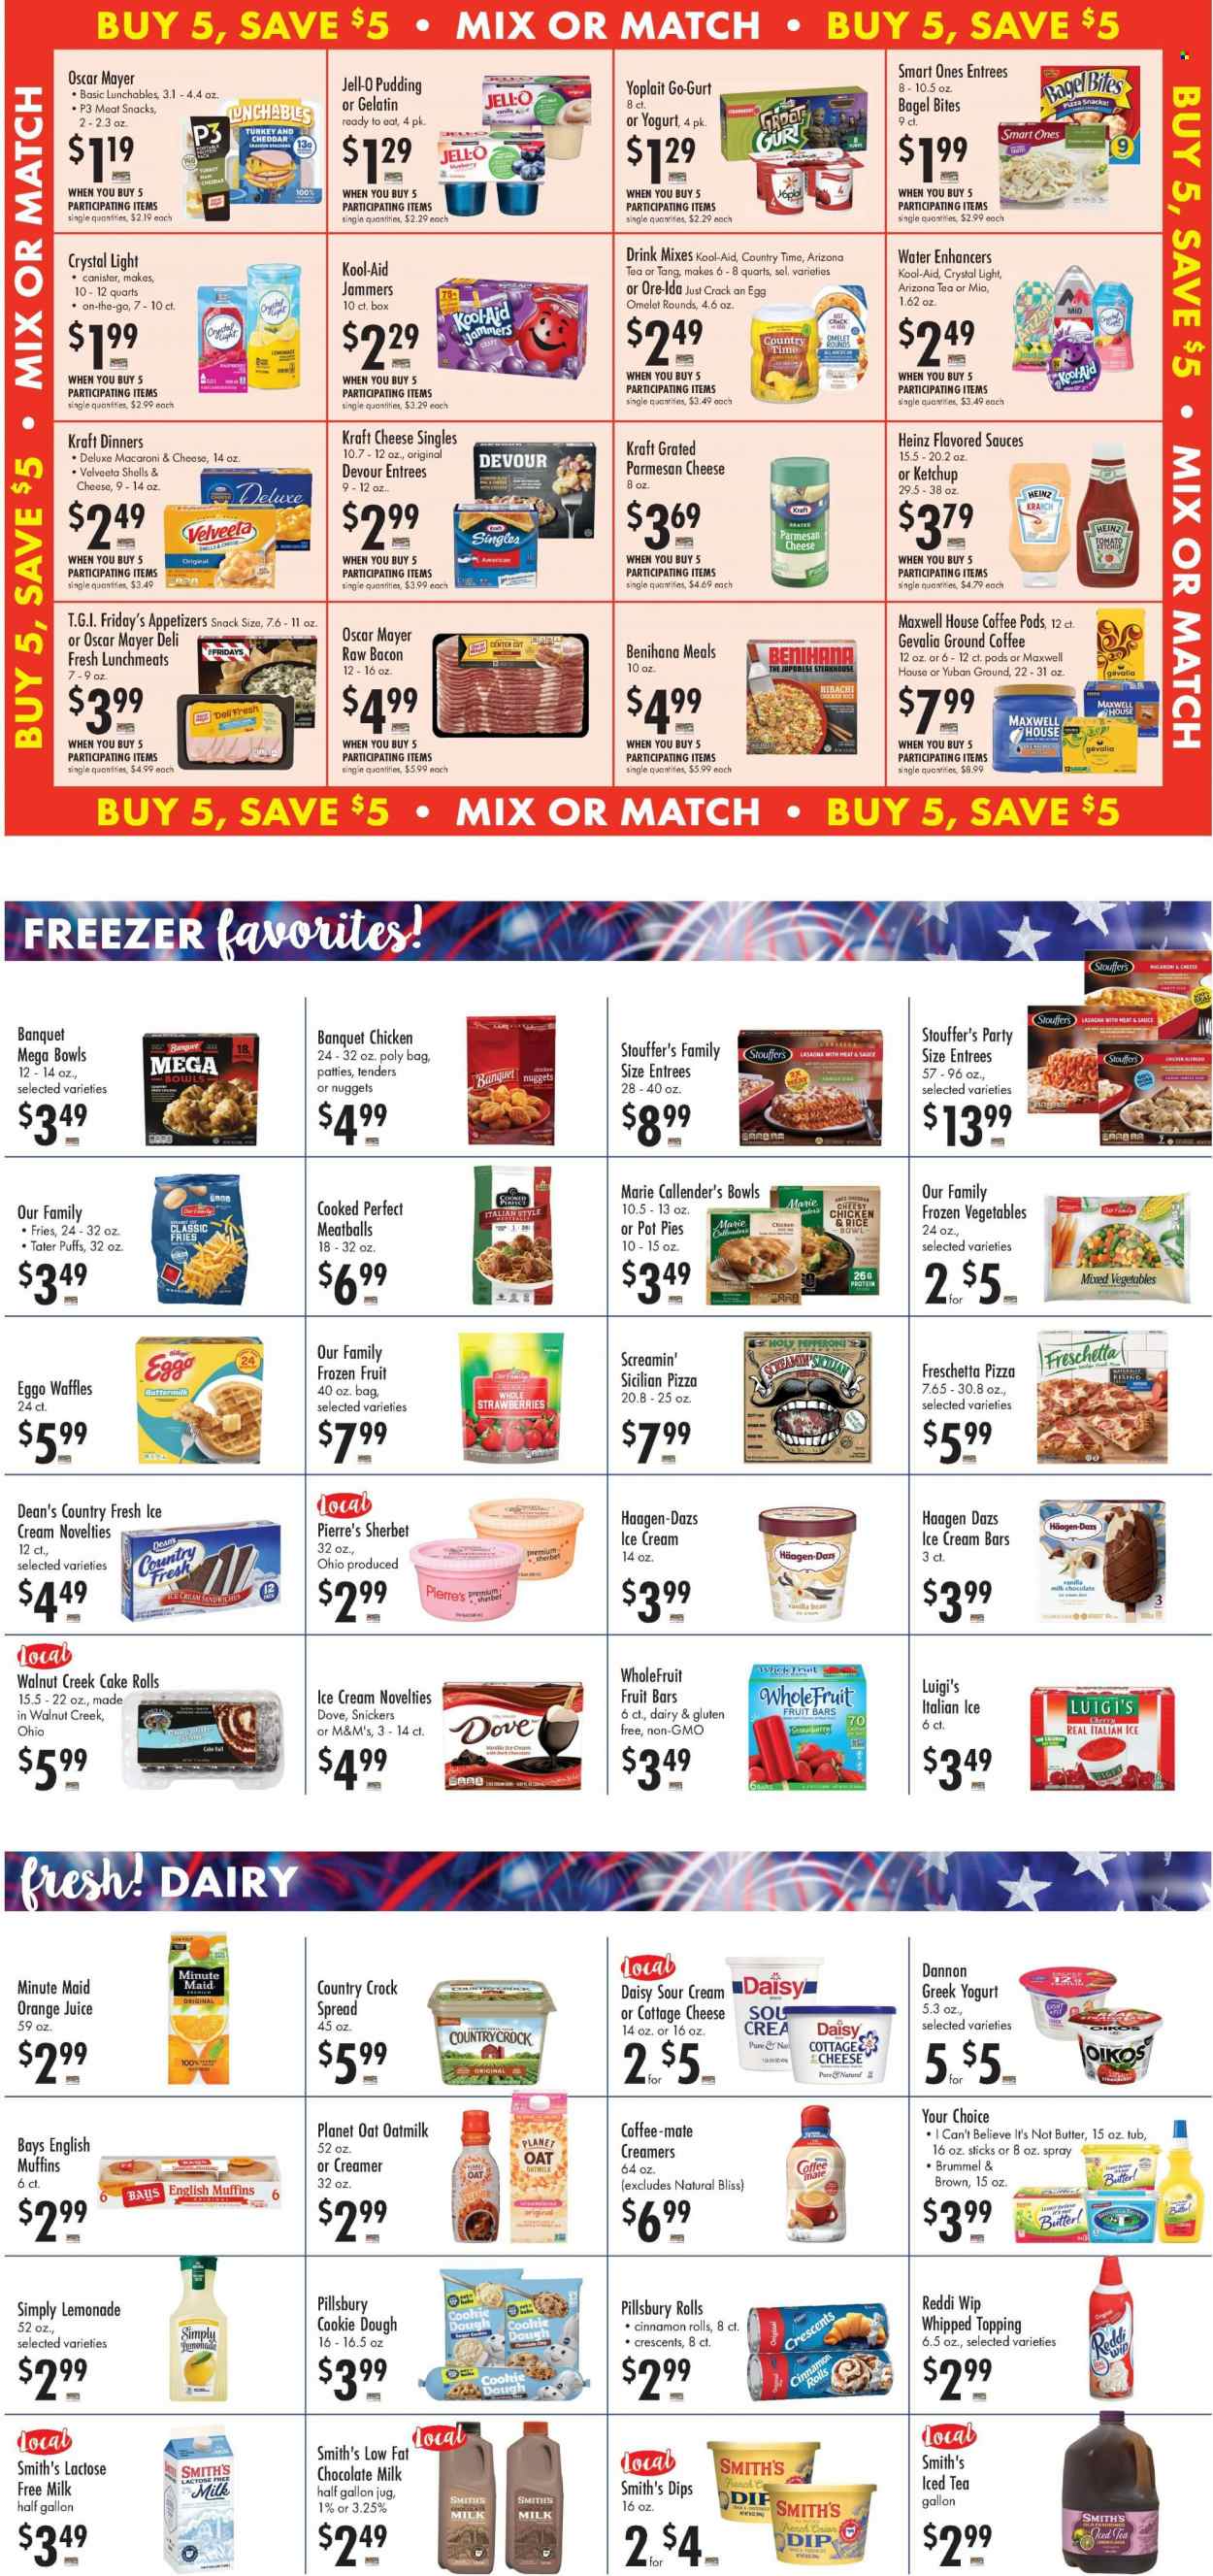 thumbnail - Buehler's Flyer - 05/24/2023 - 05/30/2023 - Sales products - bagels, english muffins, cake, pie, cinnamon roll, pot pie, puffs, waffles, strawberries, cherries, macaroni & cheese, pizza, meatballs, nuggets, Pillsbury, chicken nuggets, lasagna meal, Marie Callender's, Lunchables, Kraft®, roast, bacon, ham, Oscar Mayer, lunch meat, cottage cheese, sandwich slices, parmesan, Kraft Singles, greek yoghurt, pudding, Oikos, Yoplait, Dannon, buttermilk, Coffee-Mate, lactose free milk, oat milk, I Can't Believe It's Not Butter, sour cream, creamer, dip, ice cream, ice cream bars, sherbet, ice cream sandwich, Häagen-Dazs, fruit bar, frozen vegetables, mixed vegetables, Devour, Stouffer's, potato fries, Ore-Ida, Screamin' Sicilian, Dove, chocolate chips, snack, Snickers, M&M's, crackers, dark chocolate, Smith's, sugar, topping, Jell-O, Heinz, ketchup, lemonade, orange juice, juice, ice tea, AriZona, Country Time, fruit punch, water, Maxwell House, coffee pods, ground coffee, Gevalia, turkey, Crest, canister, bowl, calcium, gelatin. Page 4.